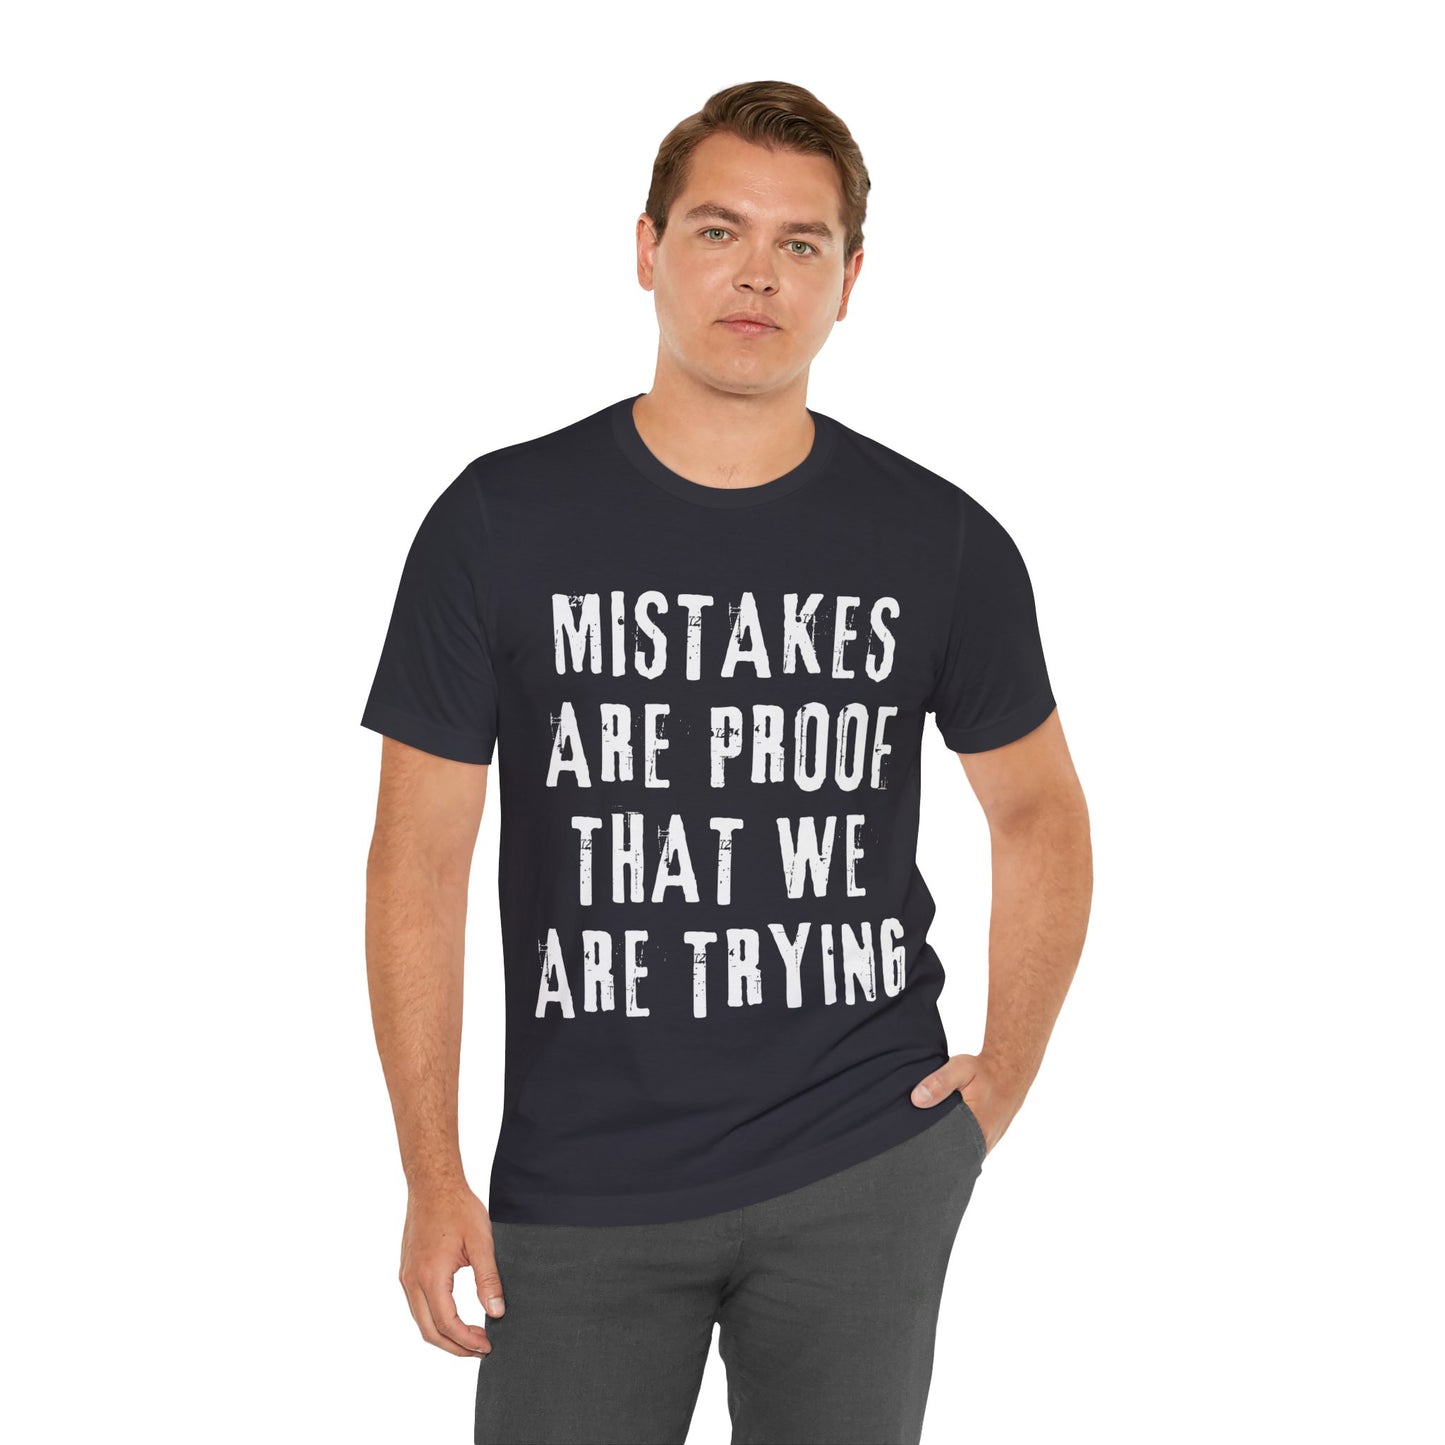 Mistakes are proof T-shirt - Dark Colors